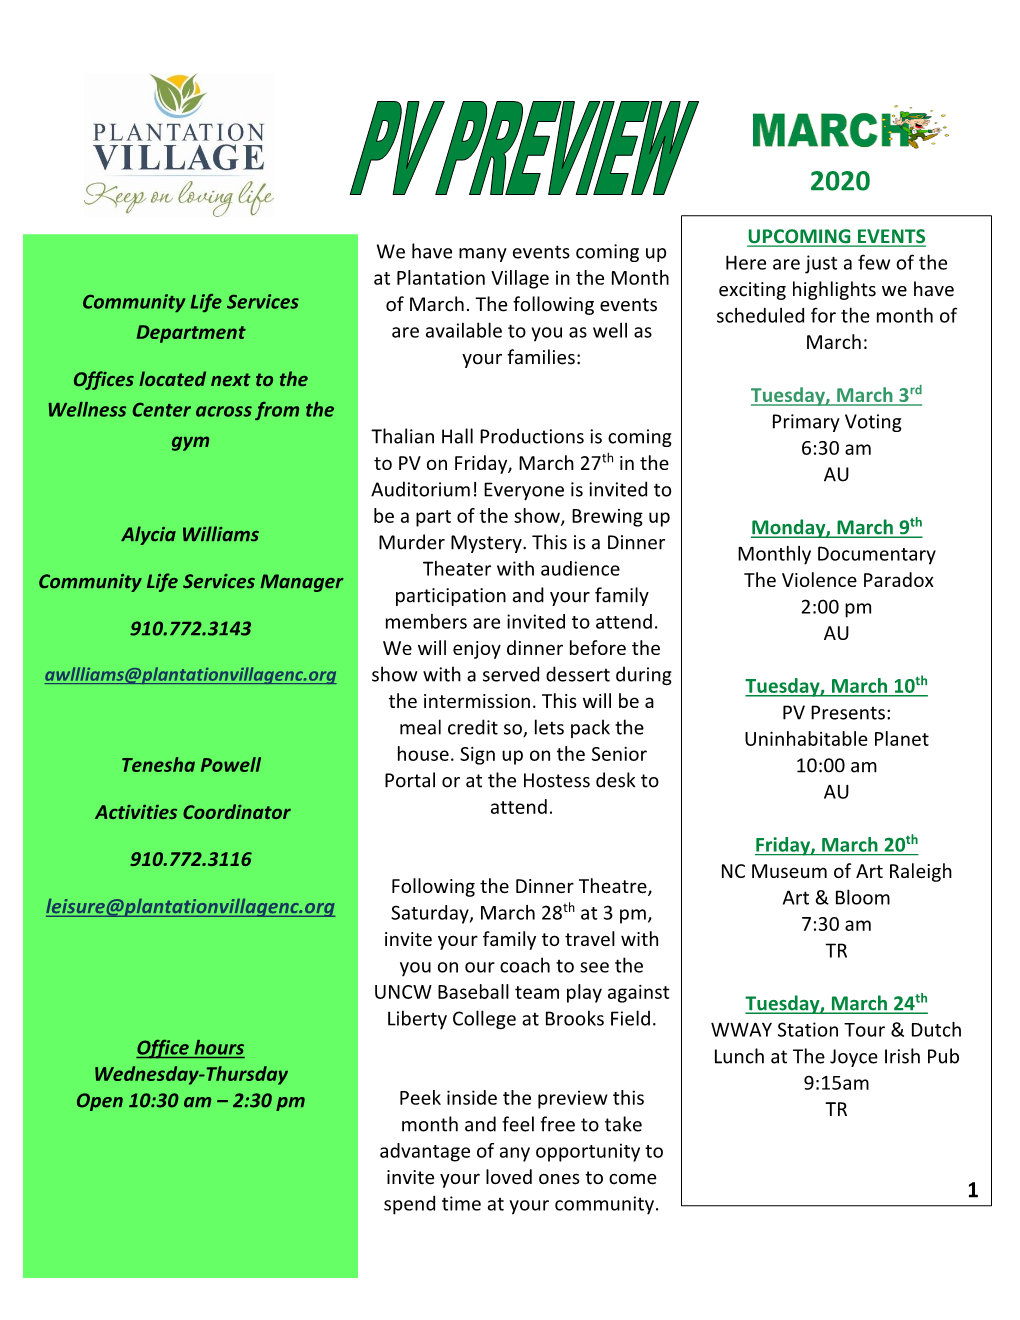 We Have Many Events Coming up at Plantation Village in the Month Of